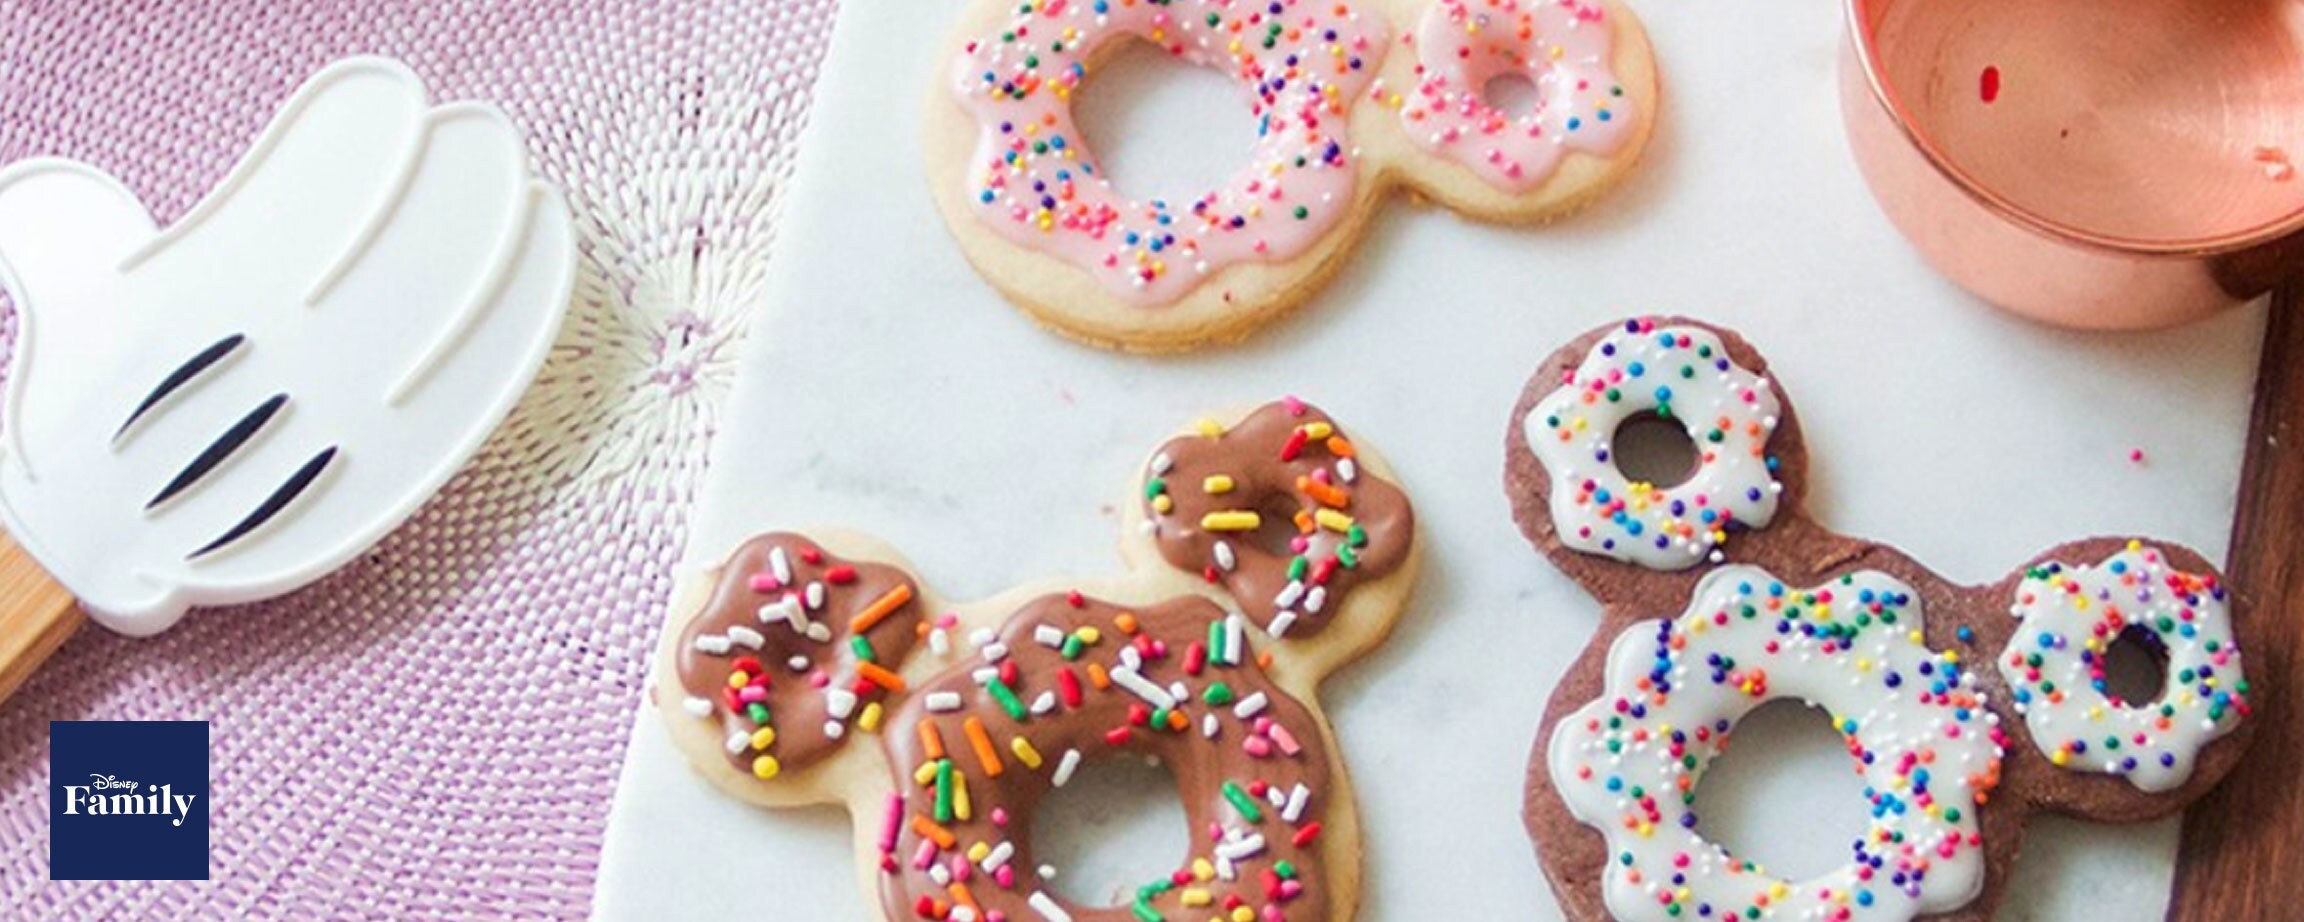 Mickey Donut Cookies Are a Magical Dessert Combo